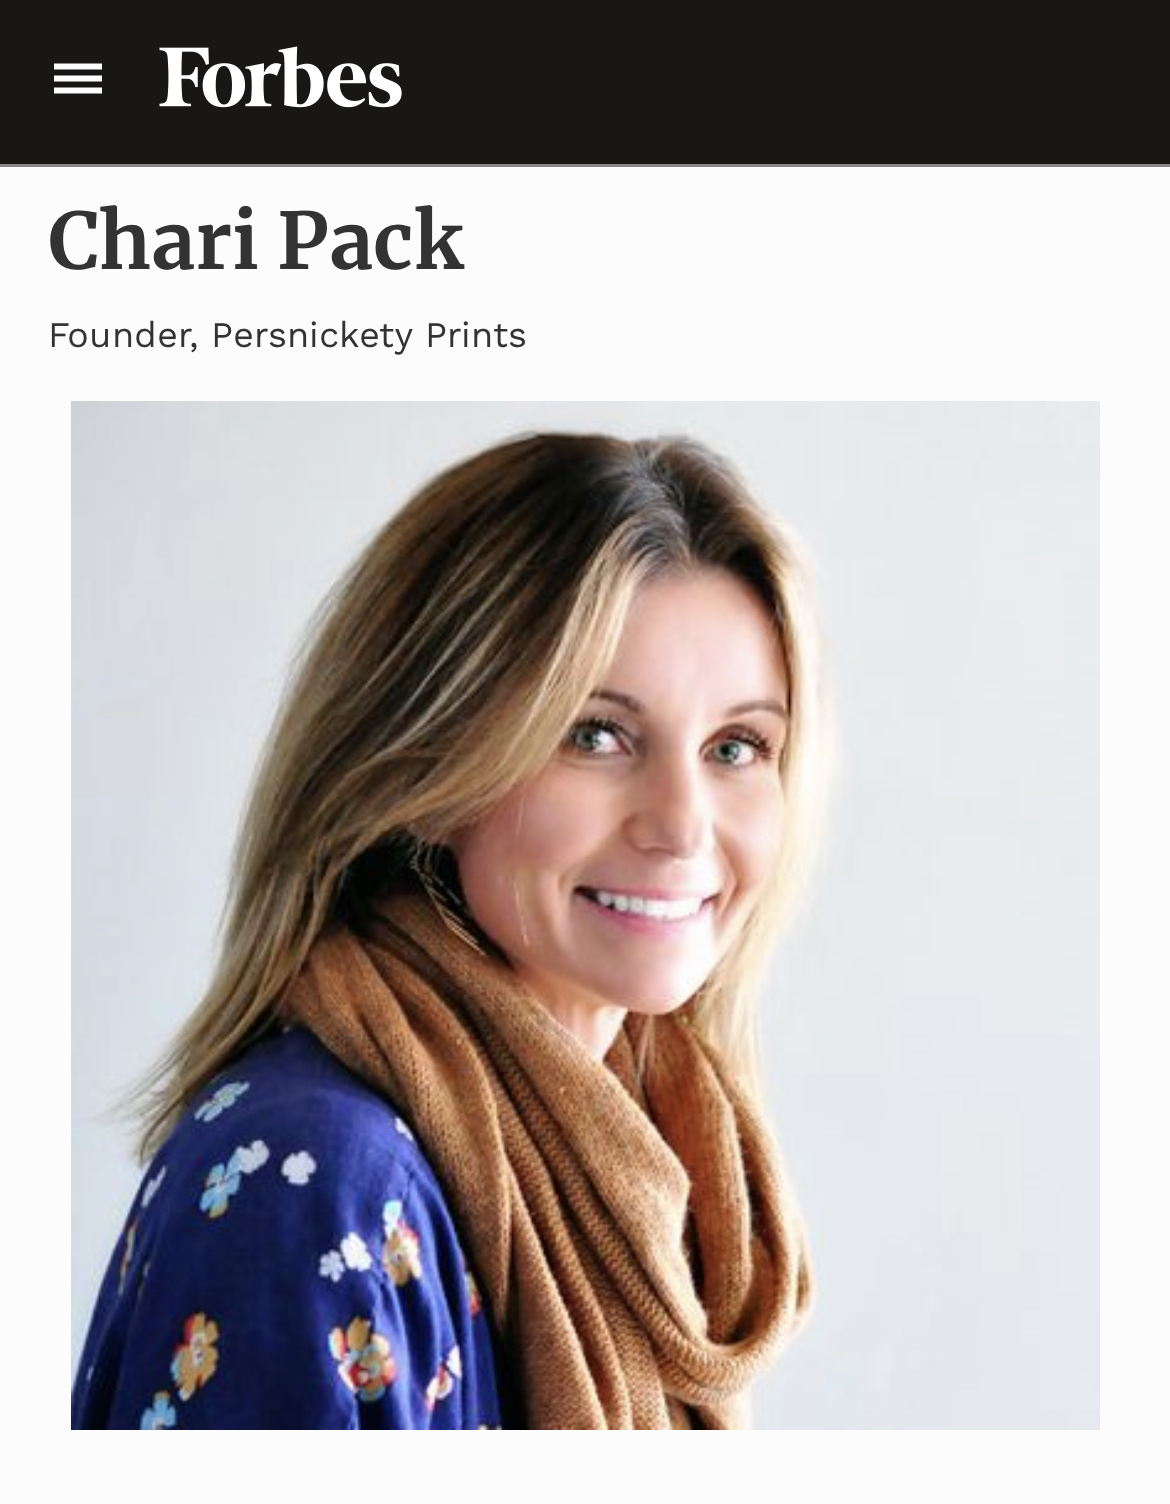 Chari Pack  Forbes 1000